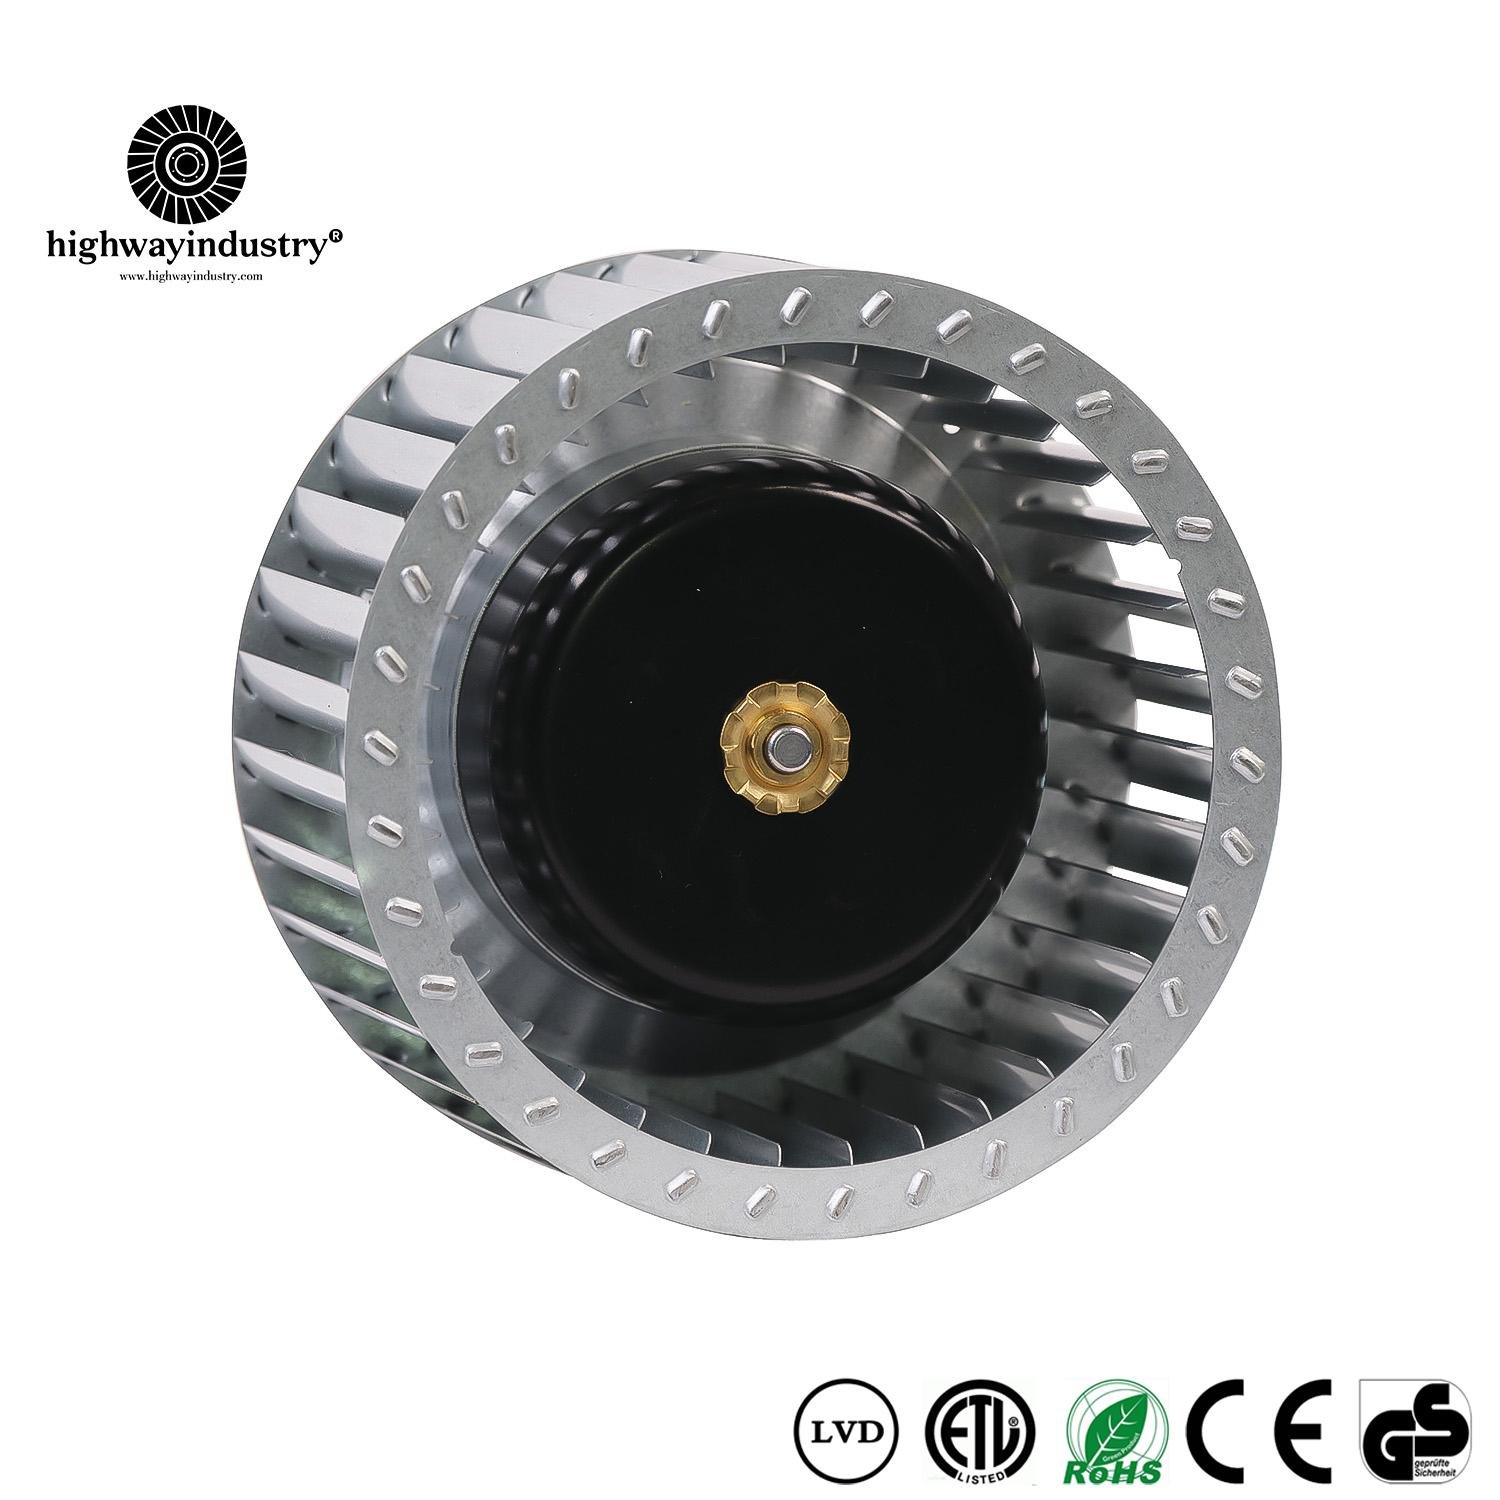 Highway Industry 120/133/175/140/160/180mm DC Forward Curved centrifugal Fan